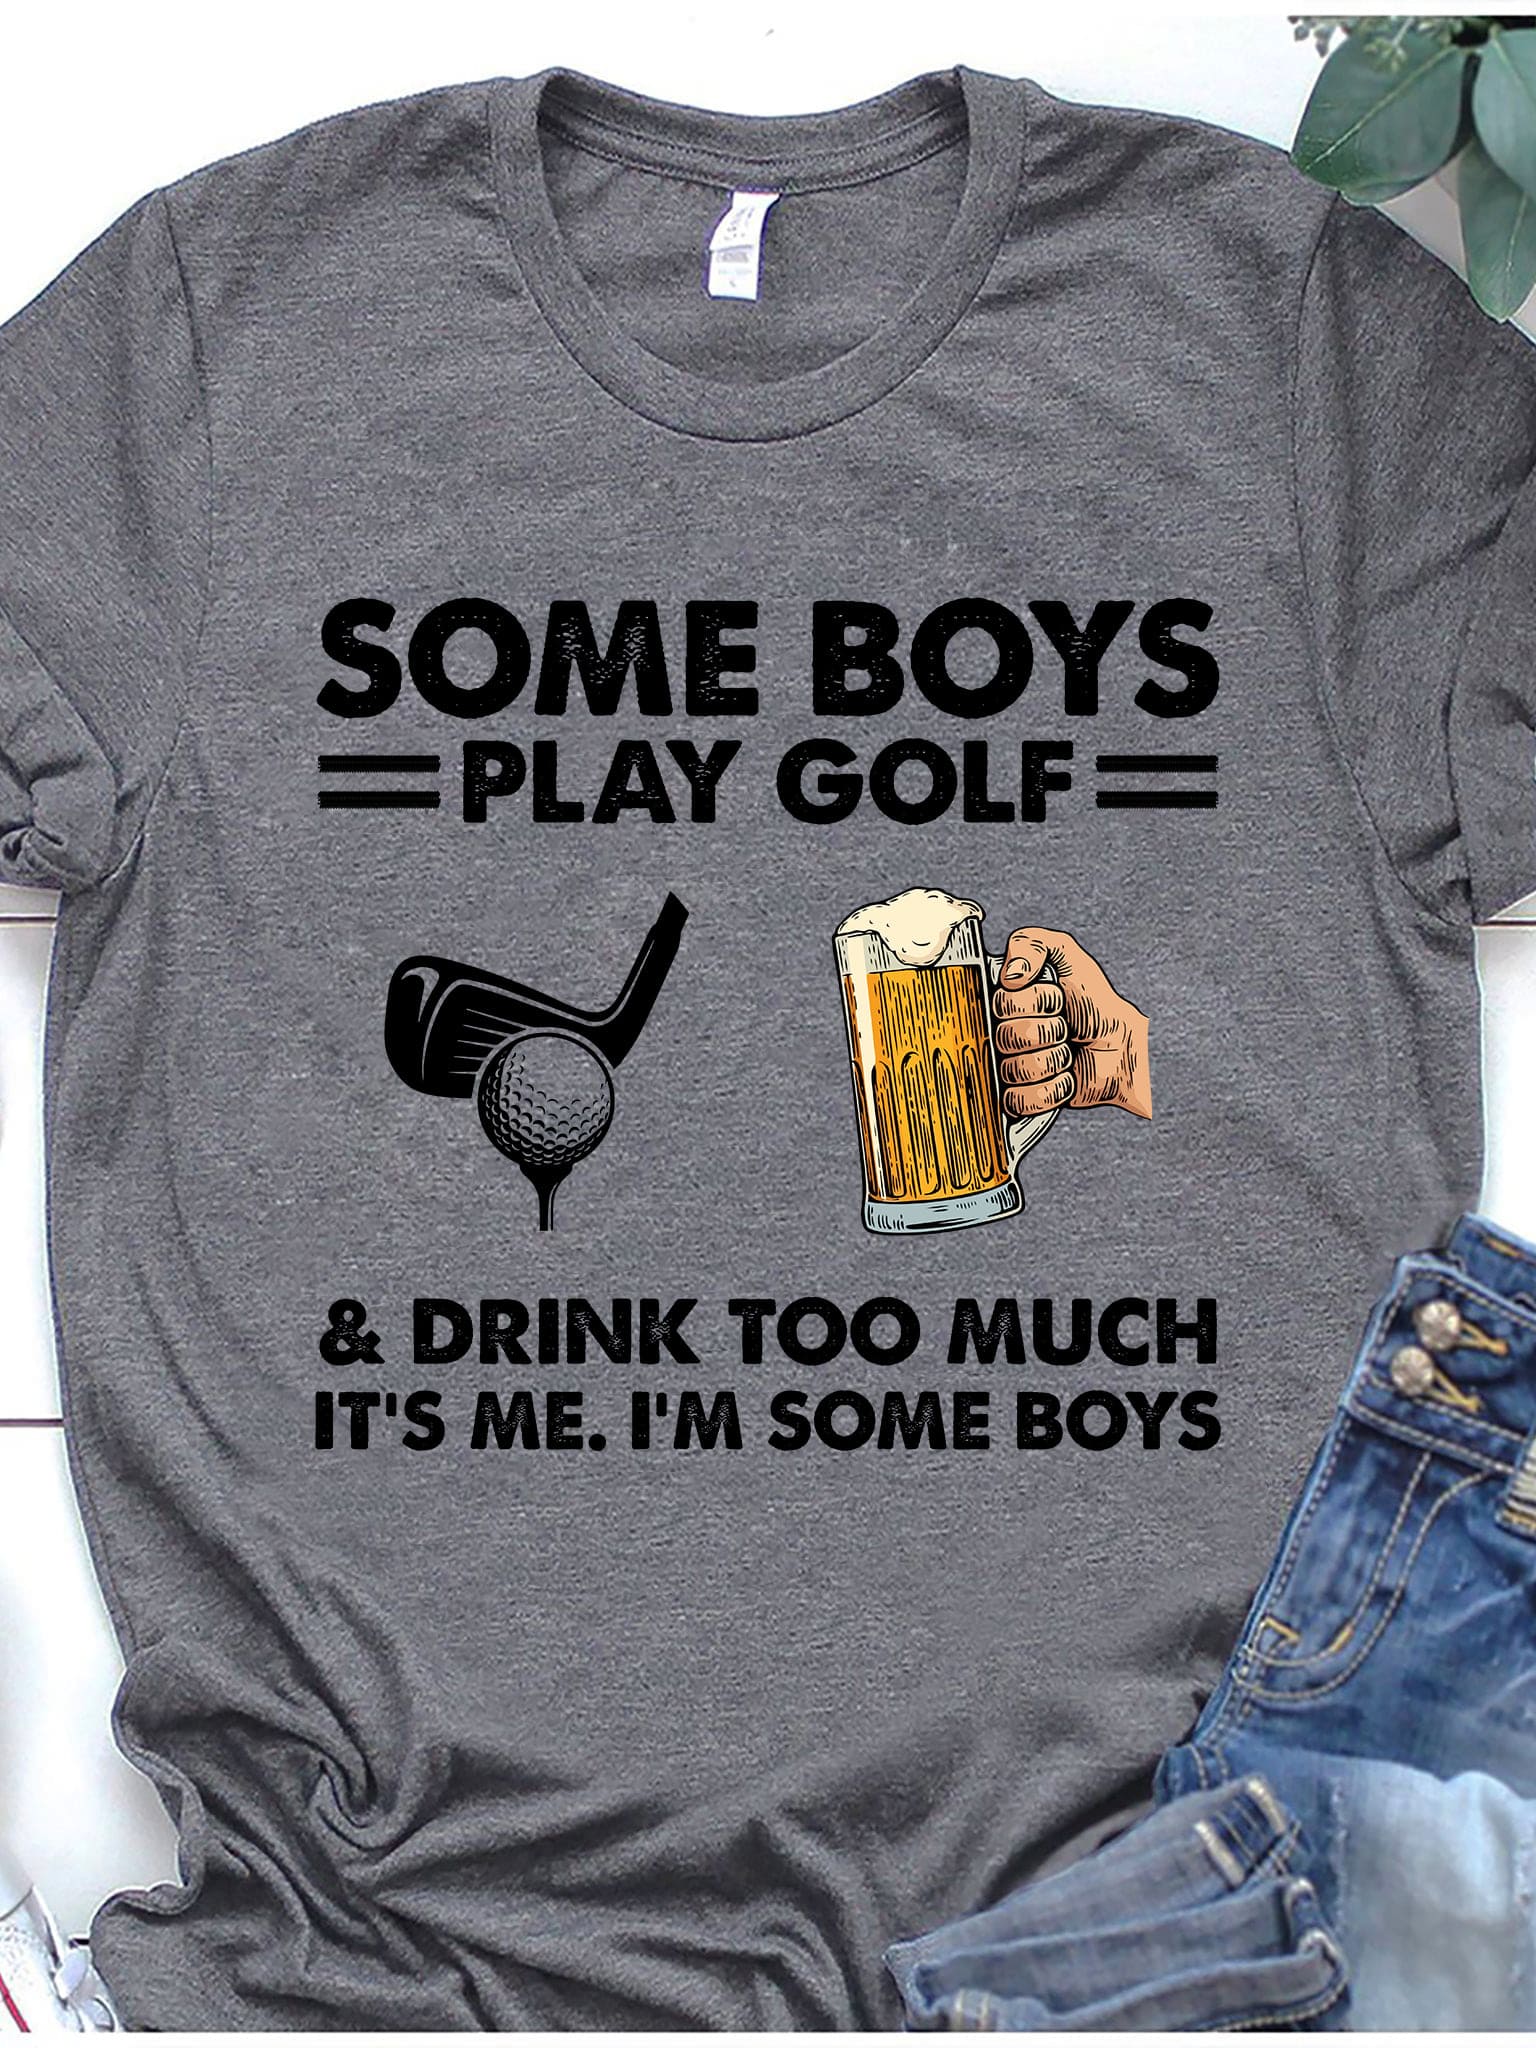 Some boys play golf and drink too much - T-shirt for golfers